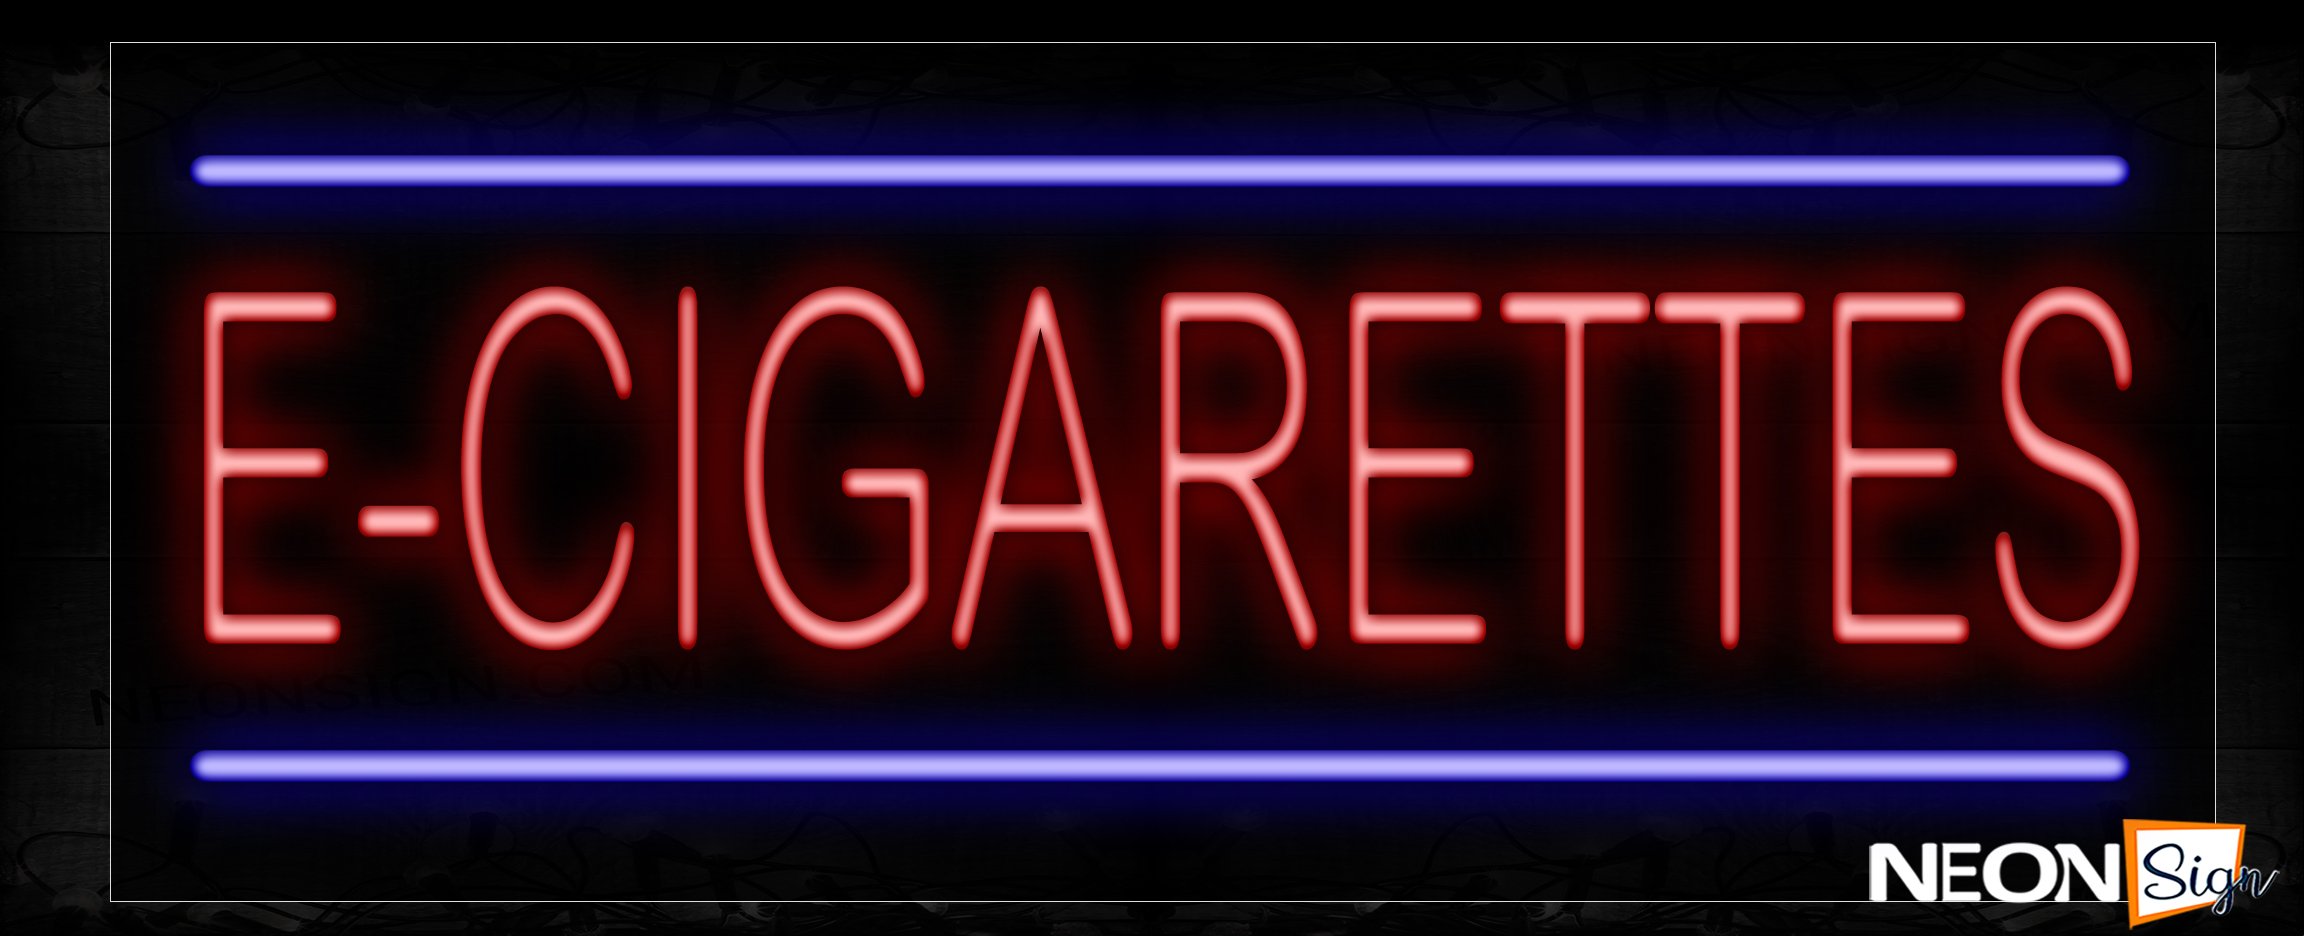 Image of 11384 E-Cigarettes In Red With Blue Lines Neon Signs_13x32 Black Backing